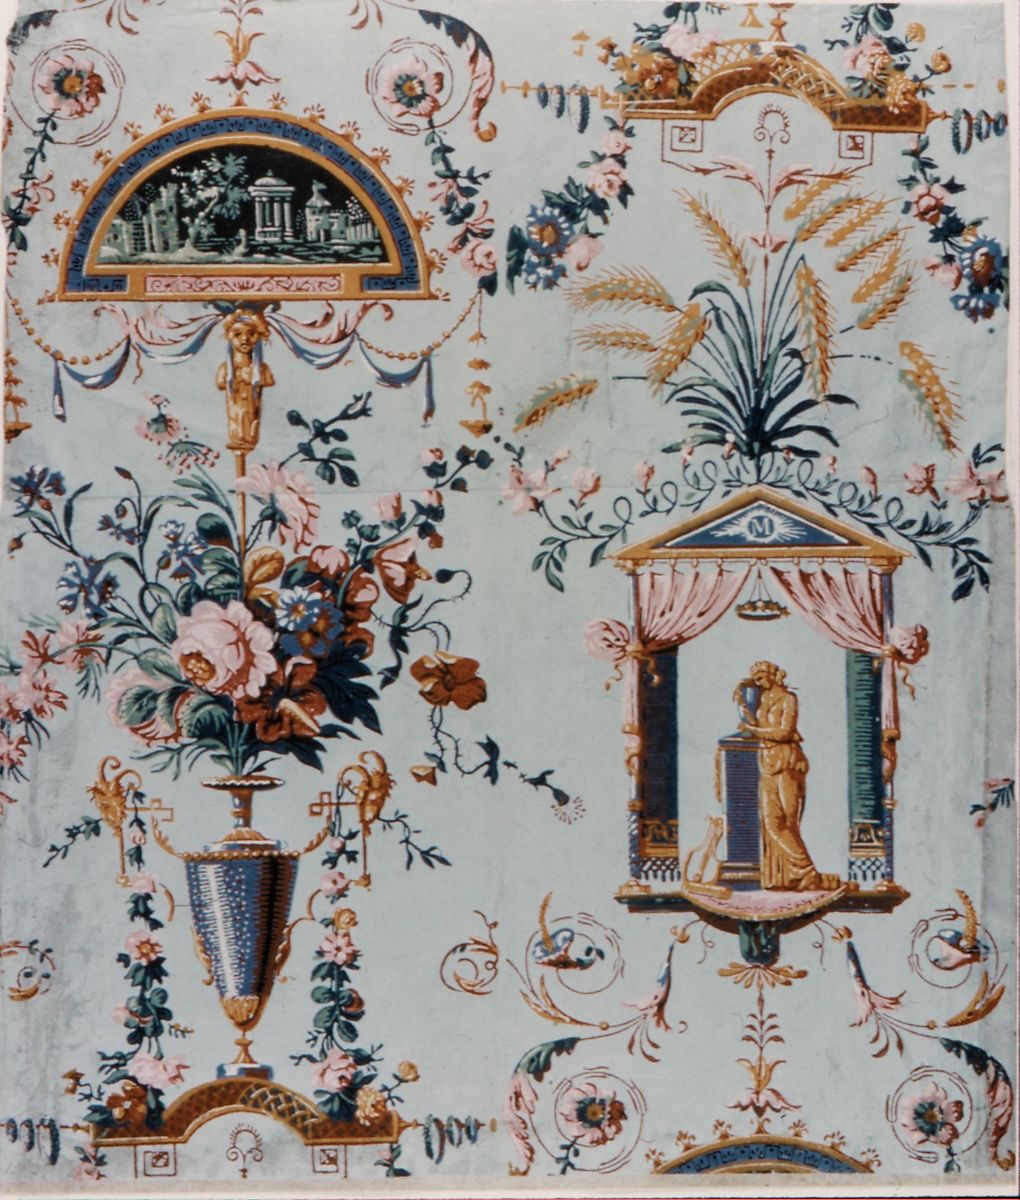 Manufactured by Réveillon. Floral Wallpaper with Classical Elements. The Metropolitan Museum of Art